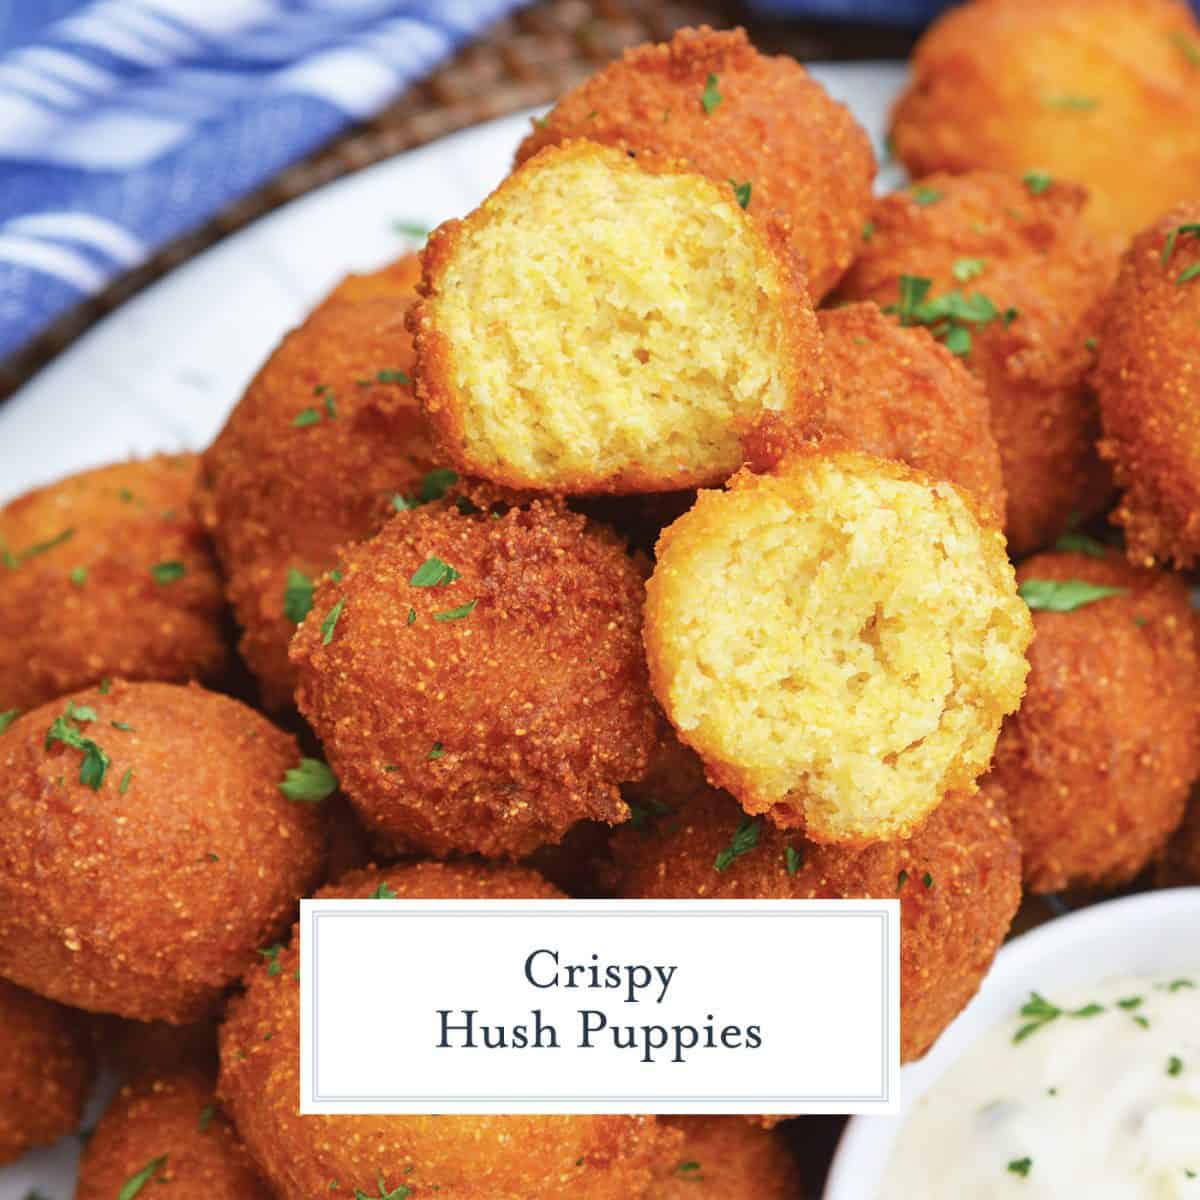 Southern Hush Puppies Recipe - Fried Cornbread in 30 minutes!